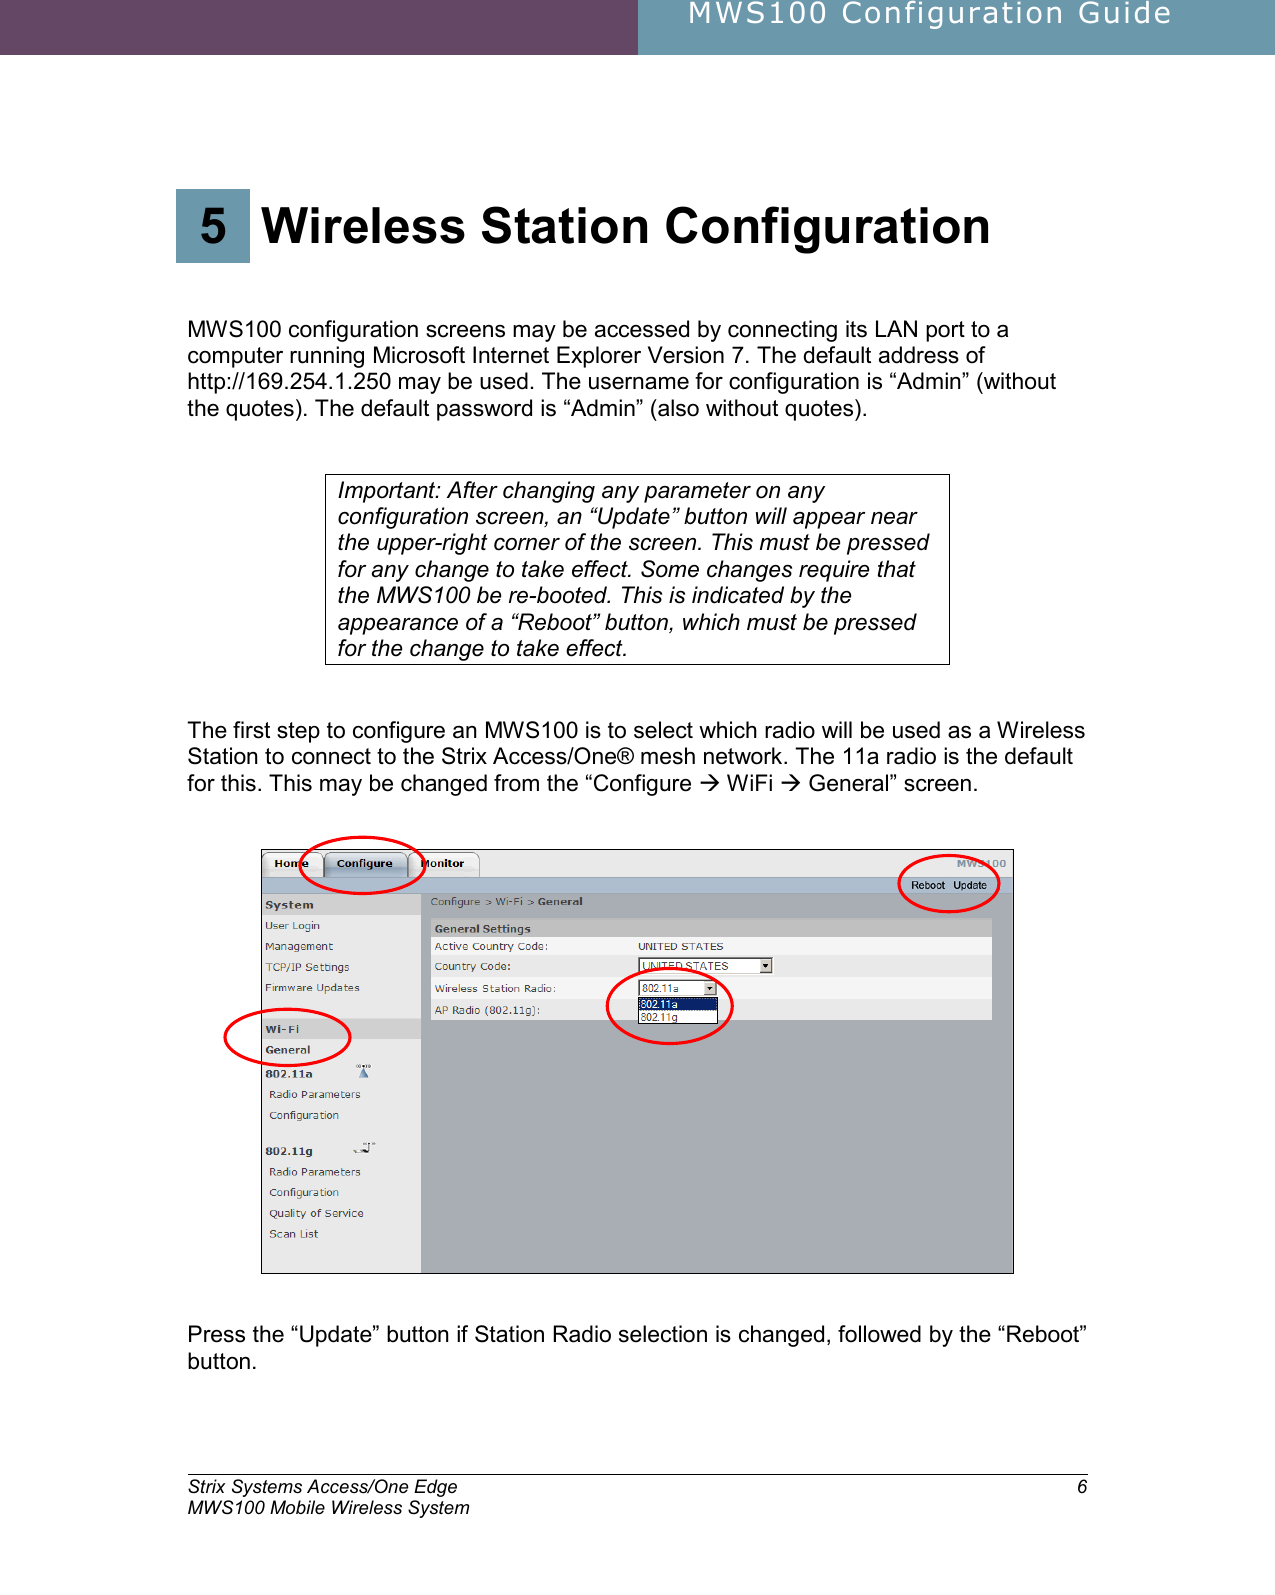     MWS100 Configuration Guide        Strix Systems Access/One Edge MWS100 Mobile Wireless System 6 5.  Wireless Station Configuration 5 Wireless Station Configuration   MWS100 configuration screens may be accessed by connecting its LAN port to a computer running Microsoft Internet Explorer Version 7. The default address of http://169.254.1.250 may be used. The username for configuration is “Admin” (without the quotes). The default password is “Admin” (also without quotes).   Important: After changing any parameter on any configuration screen, an “Update” button will appear near the upper-right corner of the screen. This must be pressed for any change to take effect. Some changes require that the MWS100 be re-booted. This is indicated by the appearance of a “Reboot” button, which must be pressed for the change to take effect.    The first step to configure an MWS100 is to select which radio will be used as a Wireless Station to connect to the Strix Access/One® mesh network. The 11a radio is the default for this. This may be changed from the “Configure  WiFi  General” screen.      Press the “Update” button if Station Radio selection is changed, followed by the “Reboot” button.  